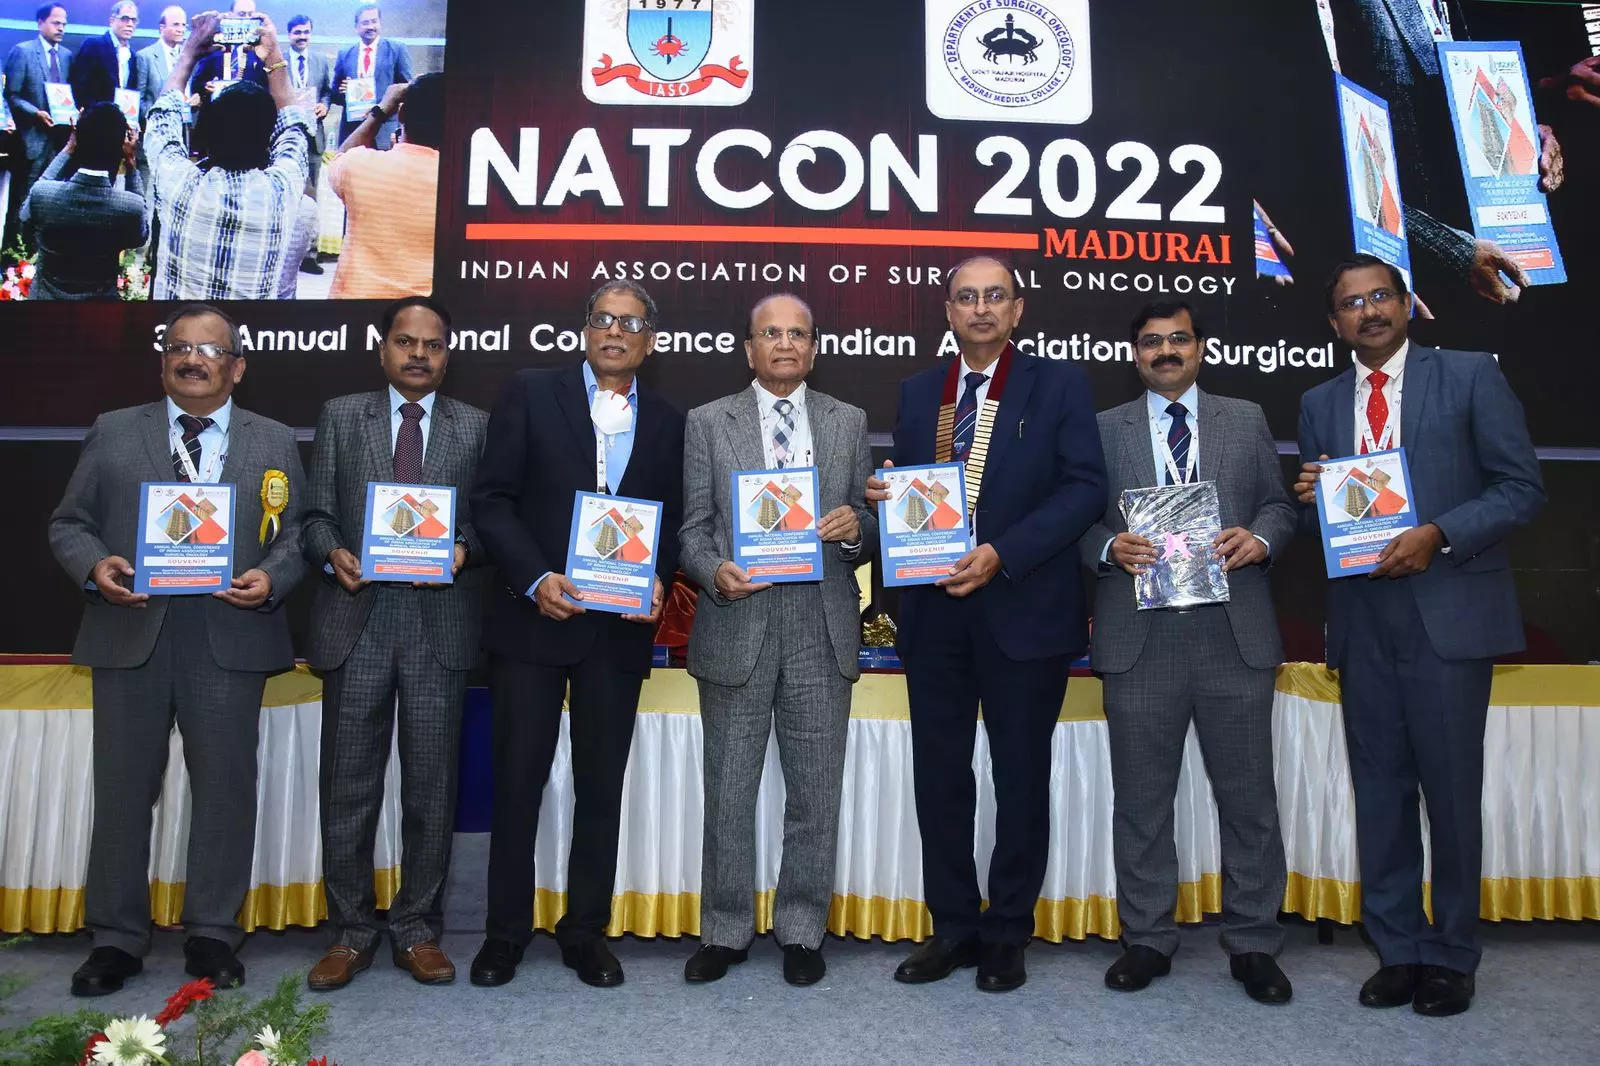 IASO NATCON 2022 aims to familiarise surgeons with latest technology in cancer treatment